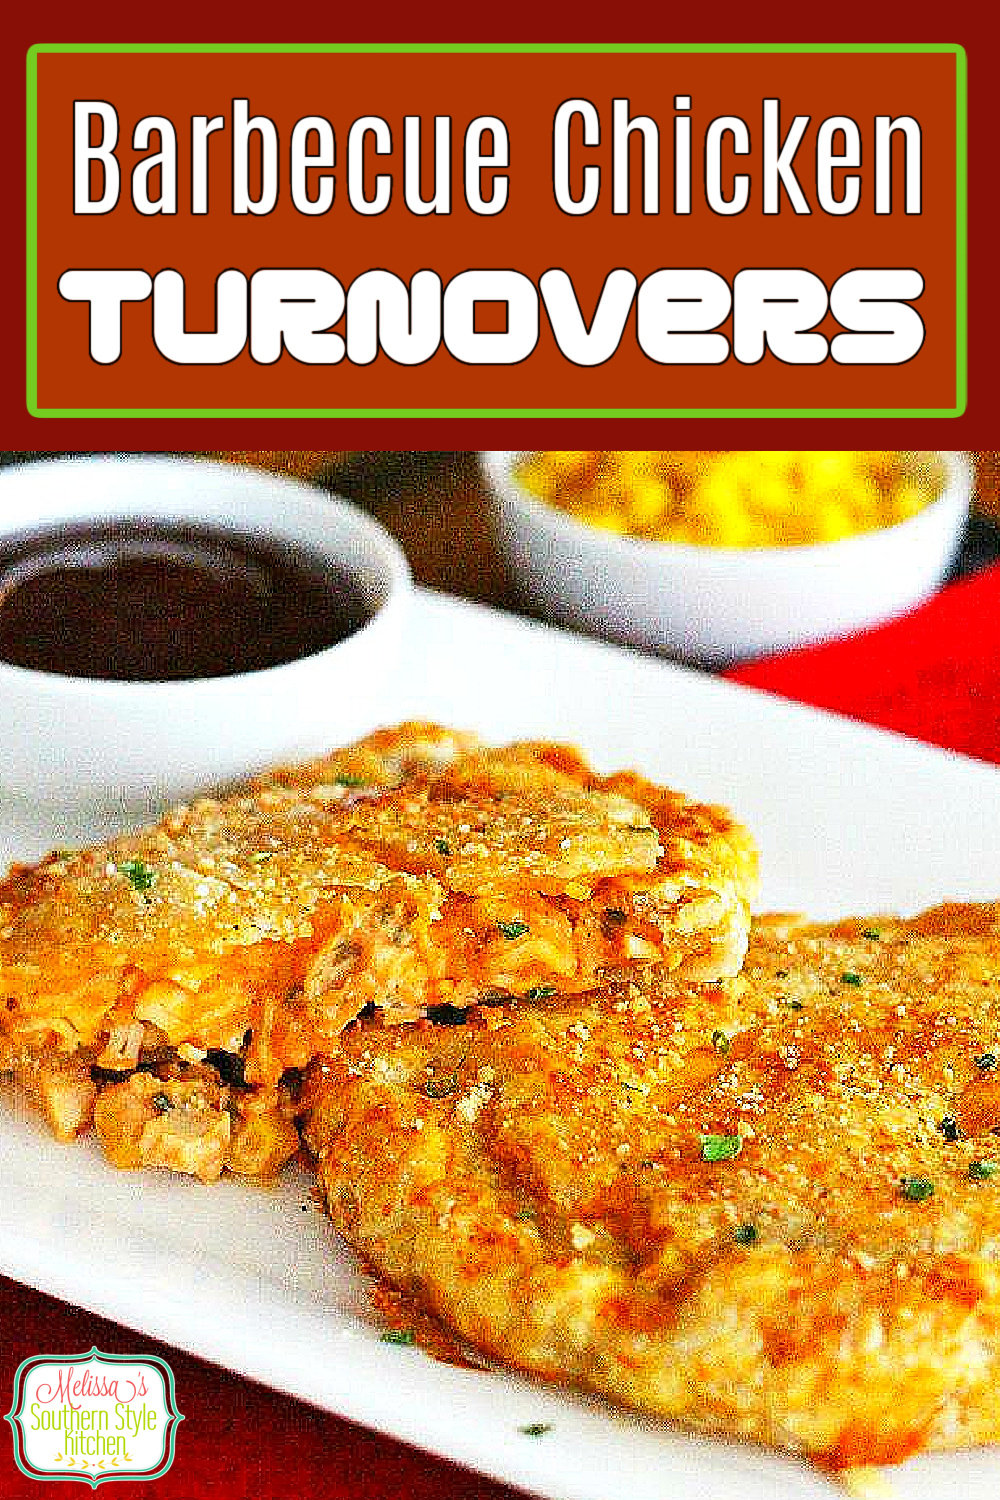 You'll save money and time when you turn rotisserie chicken into these Creamy Barbecue Chicken Turnovers for a busy day meal #easychickenrecipes #chickenturnovers #handpies #barbecuechicken #barbecue #barbecuechickenturnovers via @melissasssk